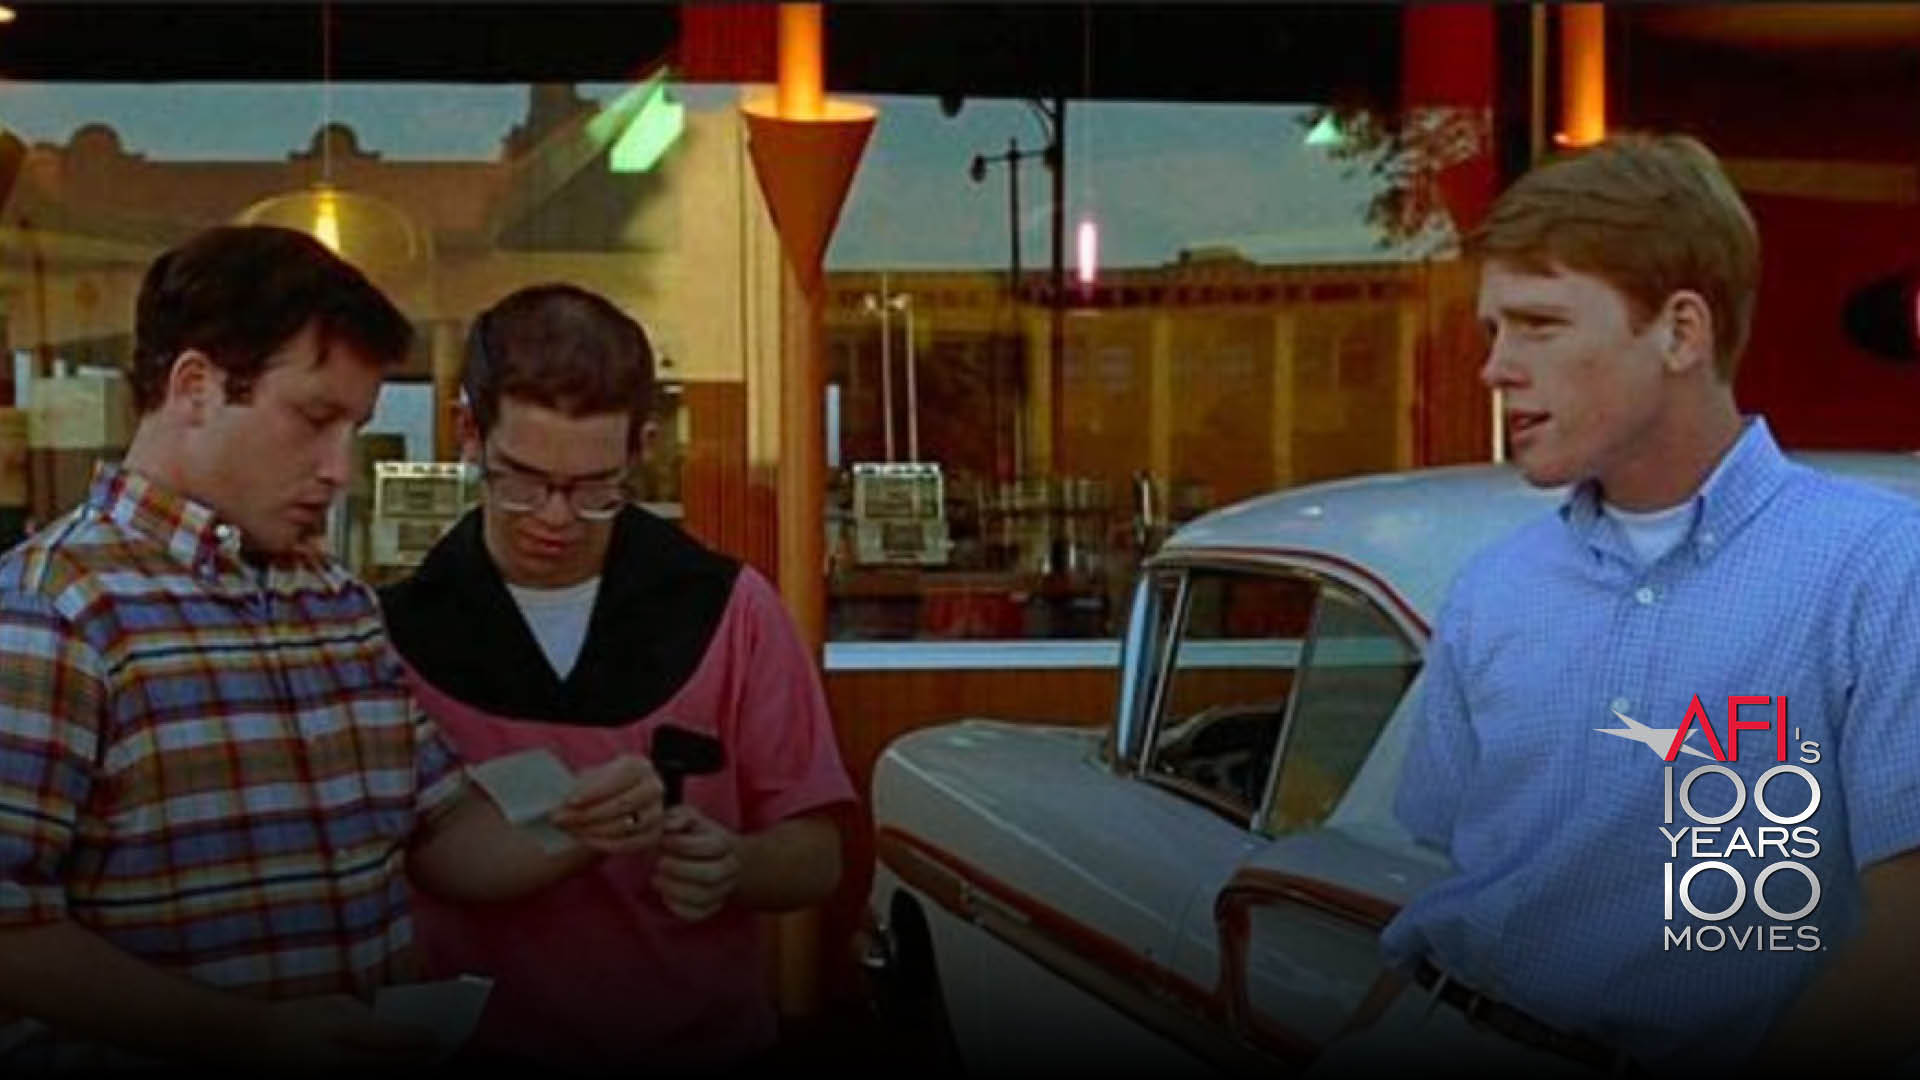 Image from the film AMERICAN GRAFFITI